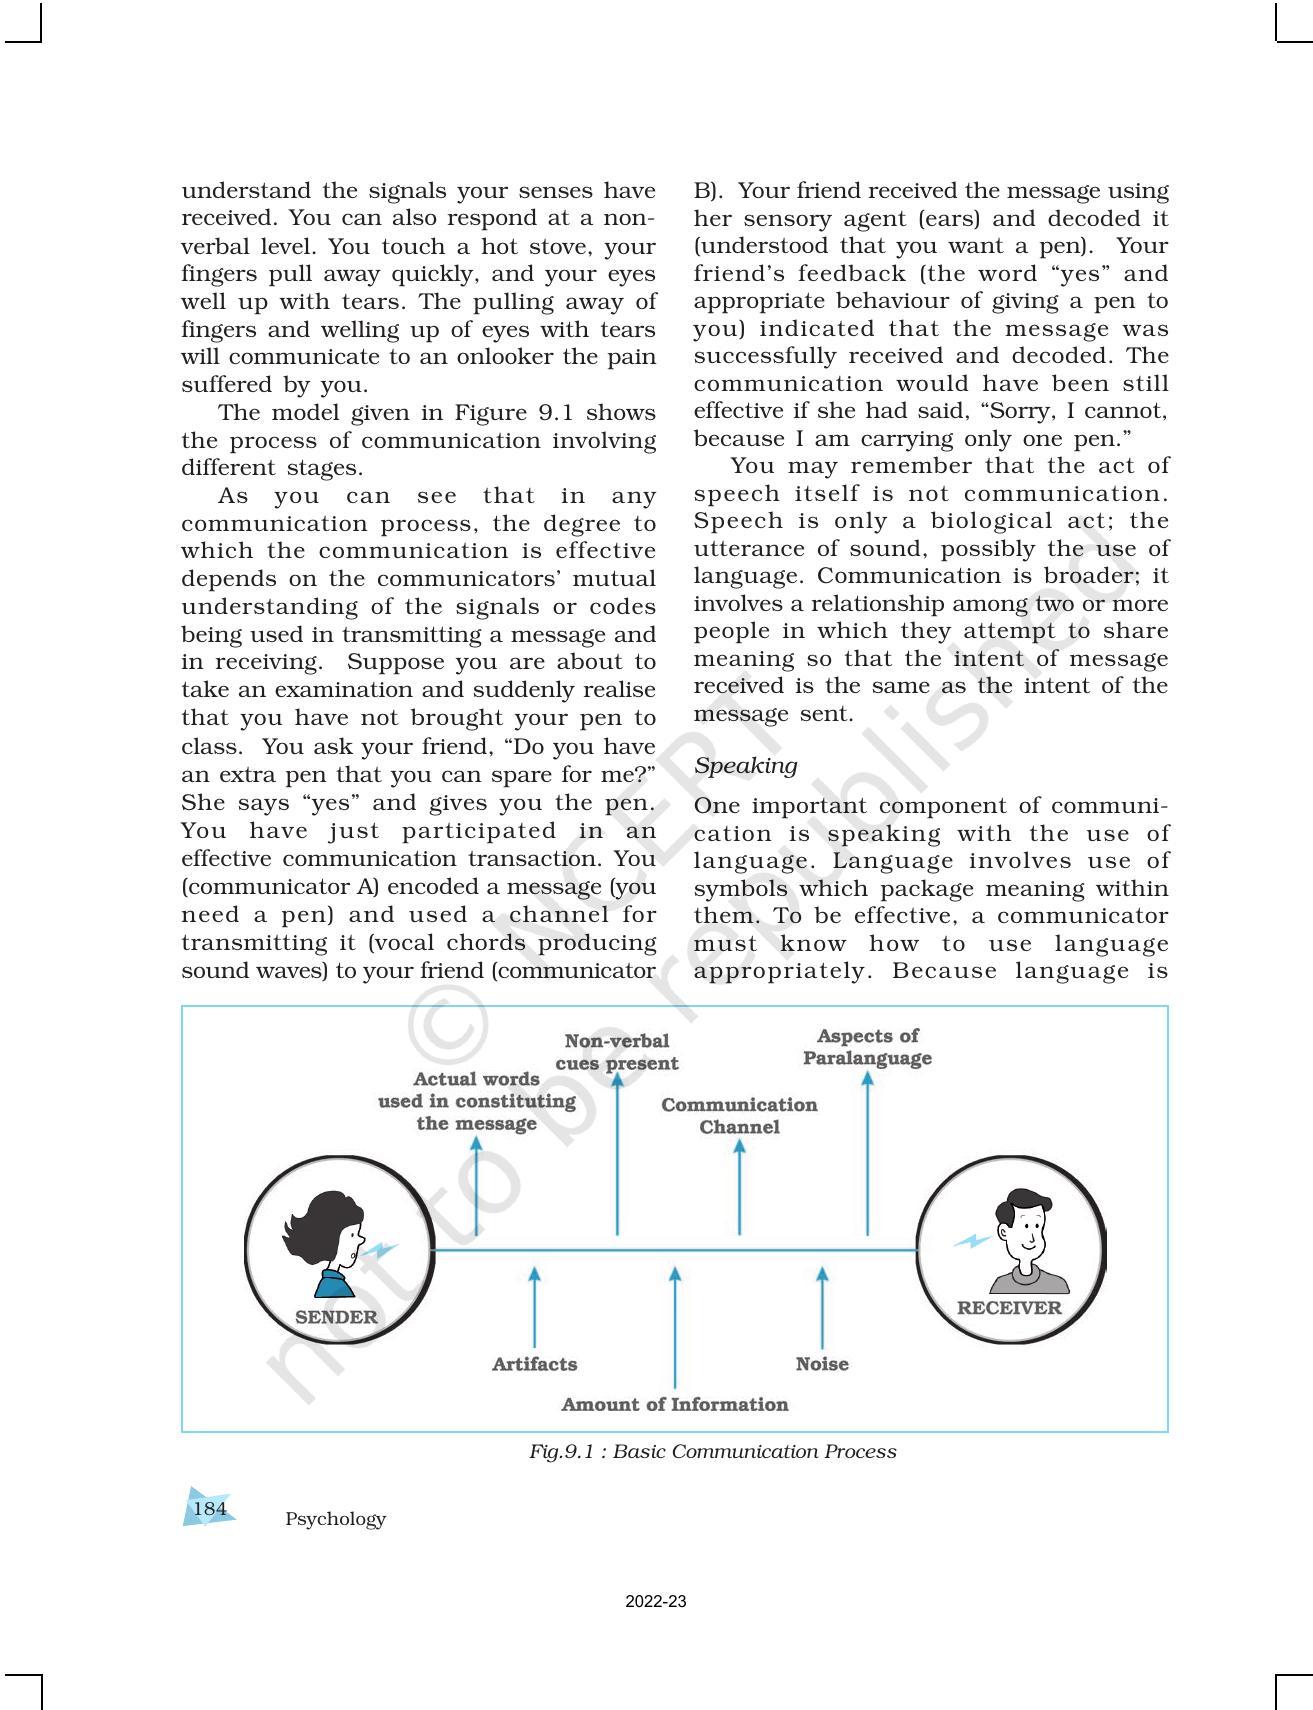 NCERT Book for Class 12 Psychology Chapter 9 Developing Psychological Skills - Page 8